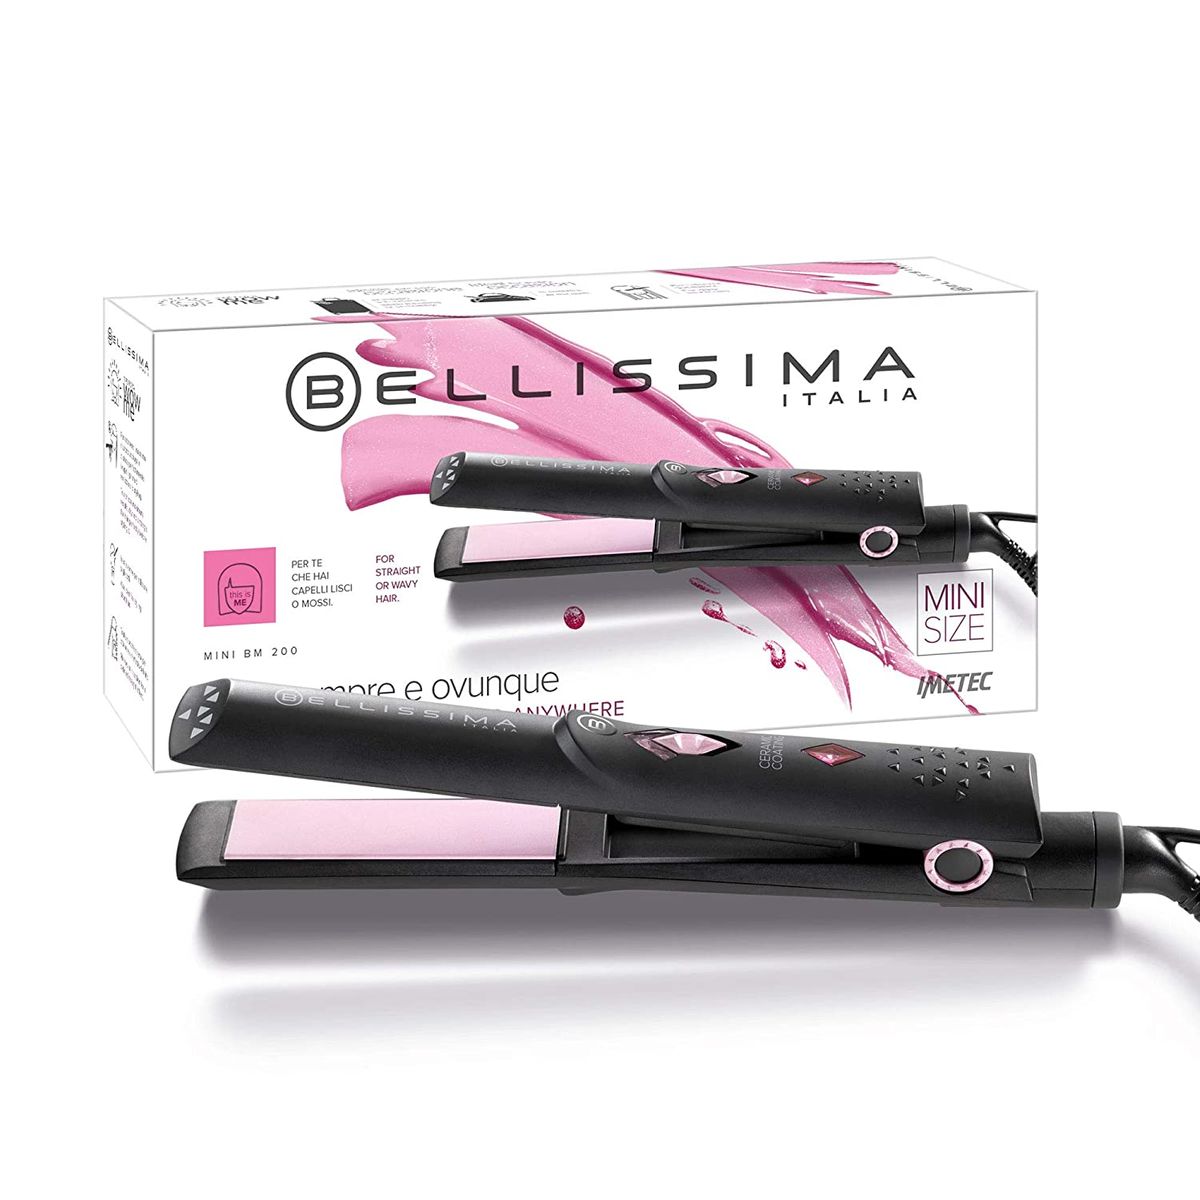 Imetec Bellissima BM 200, mini straightener for smooth and shiny hair, temperature: 200 C, hair straightener, automatic multiple voltage, compact, ideal for travel.